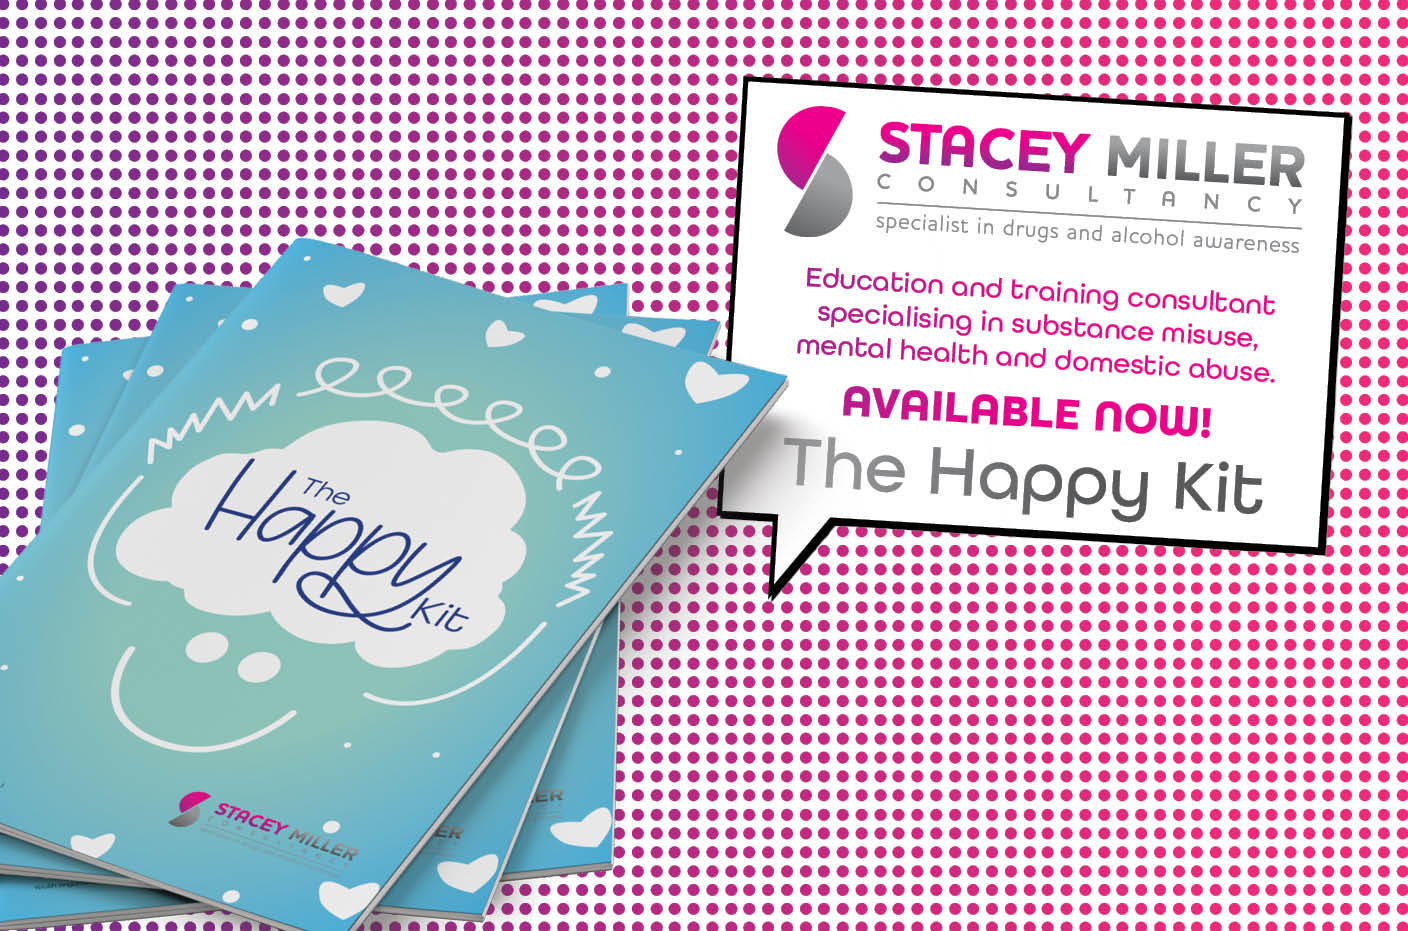 Children's Mental Health Week 2021: the Happy Kit™ for Parents